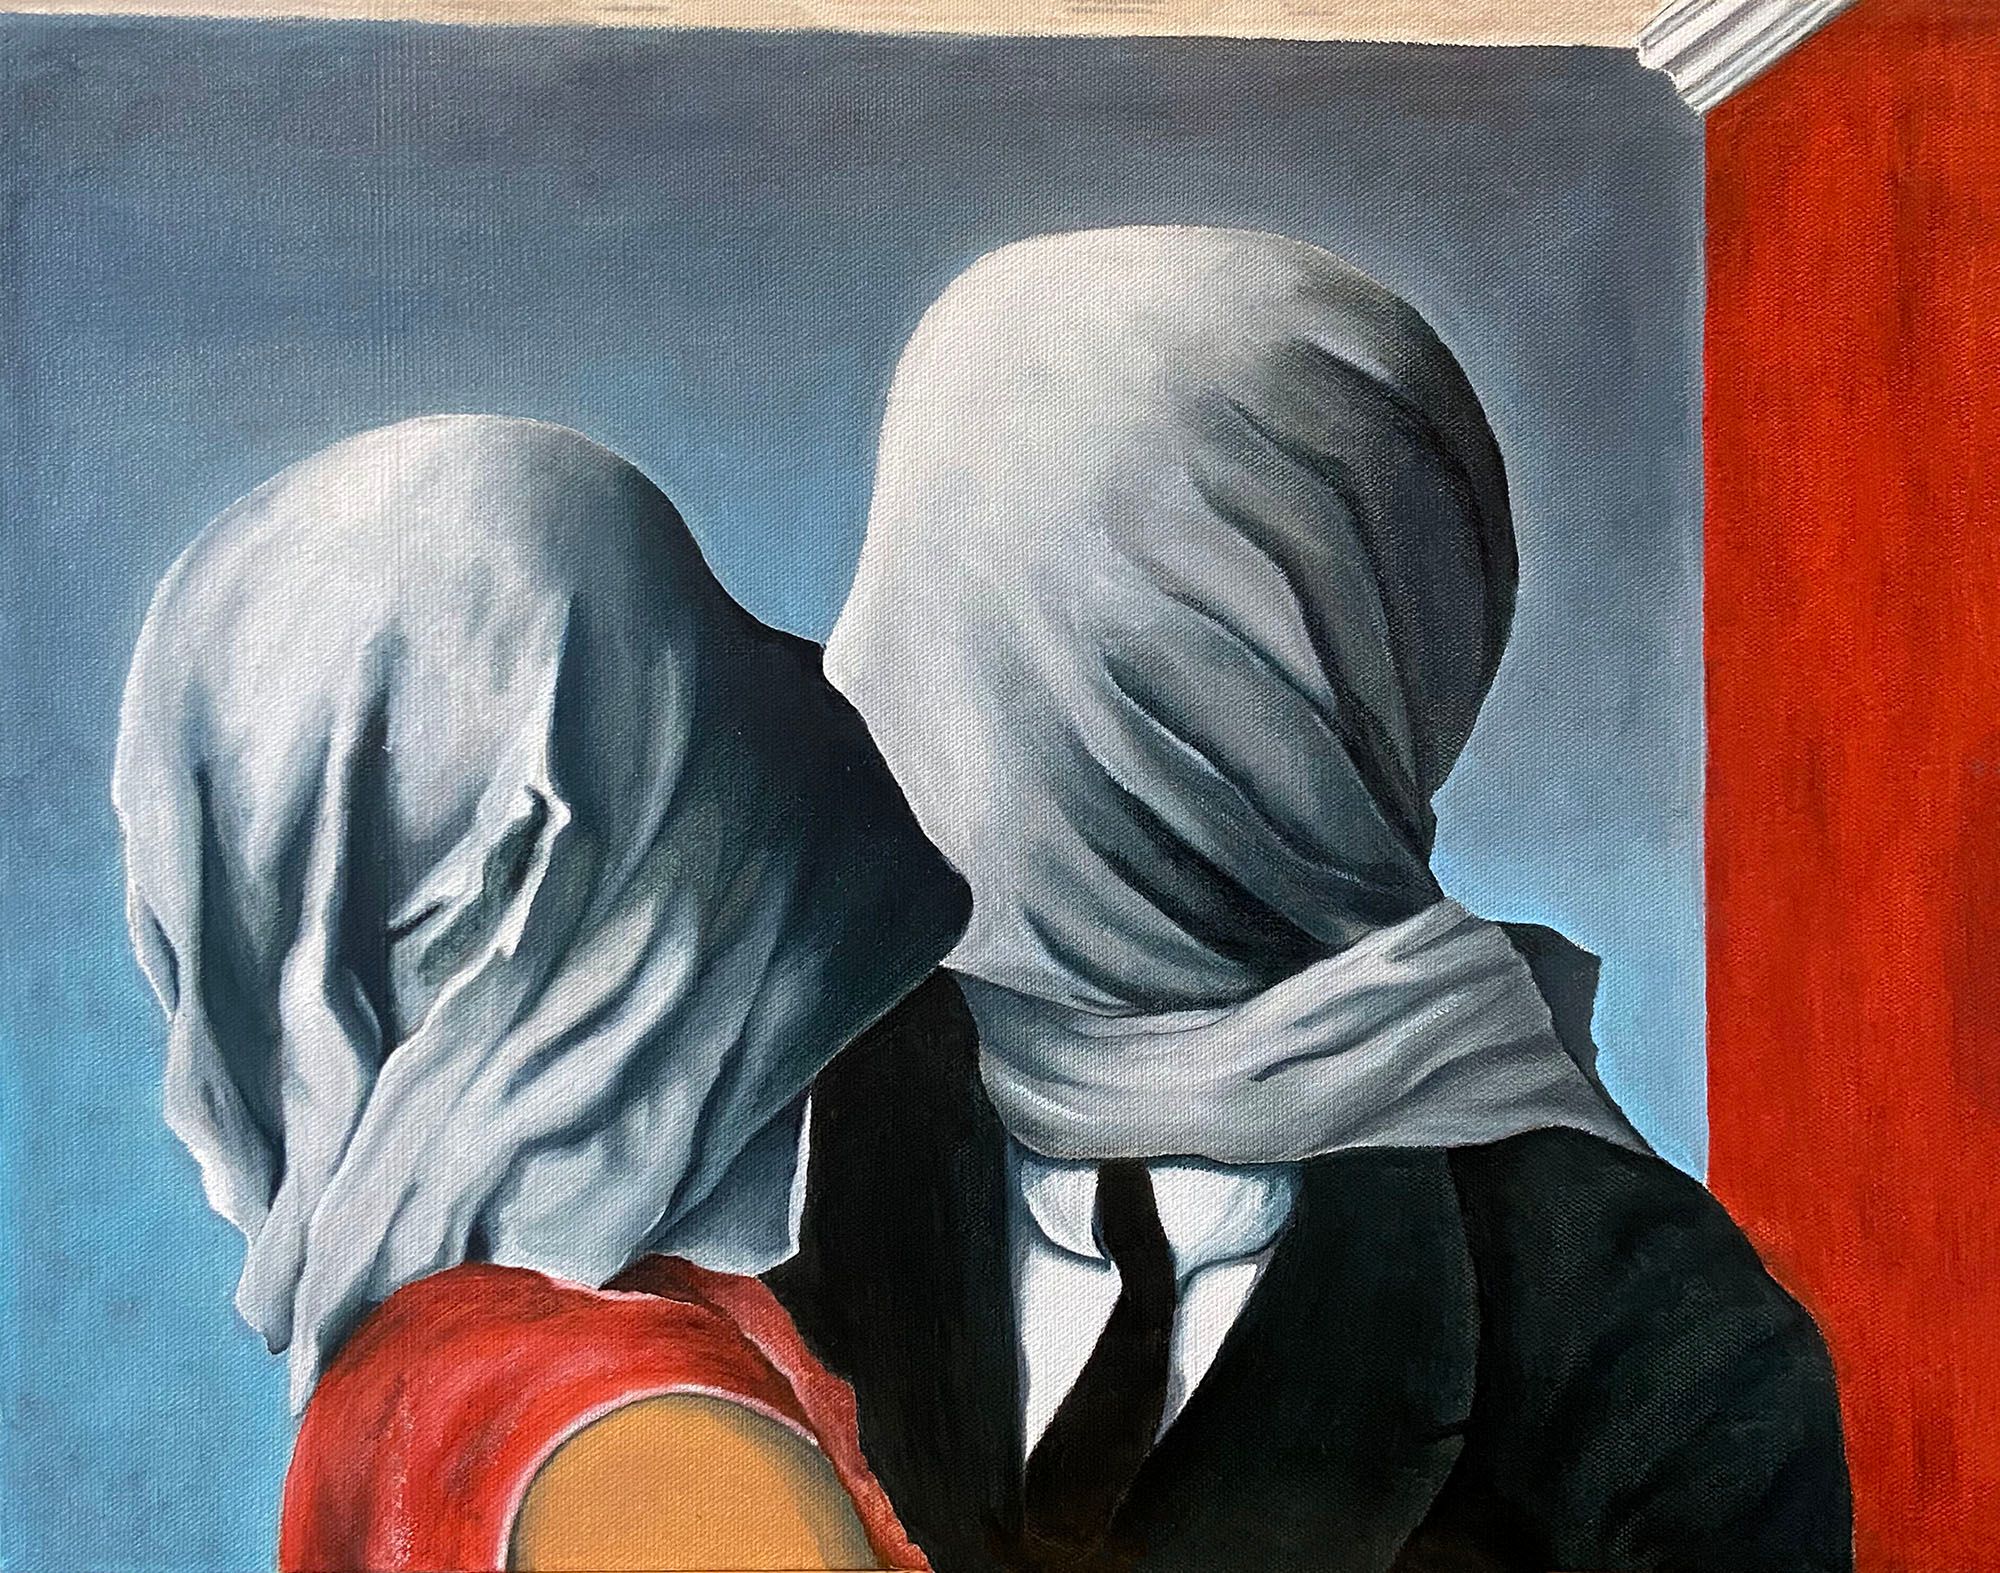 rene magritte the lovers